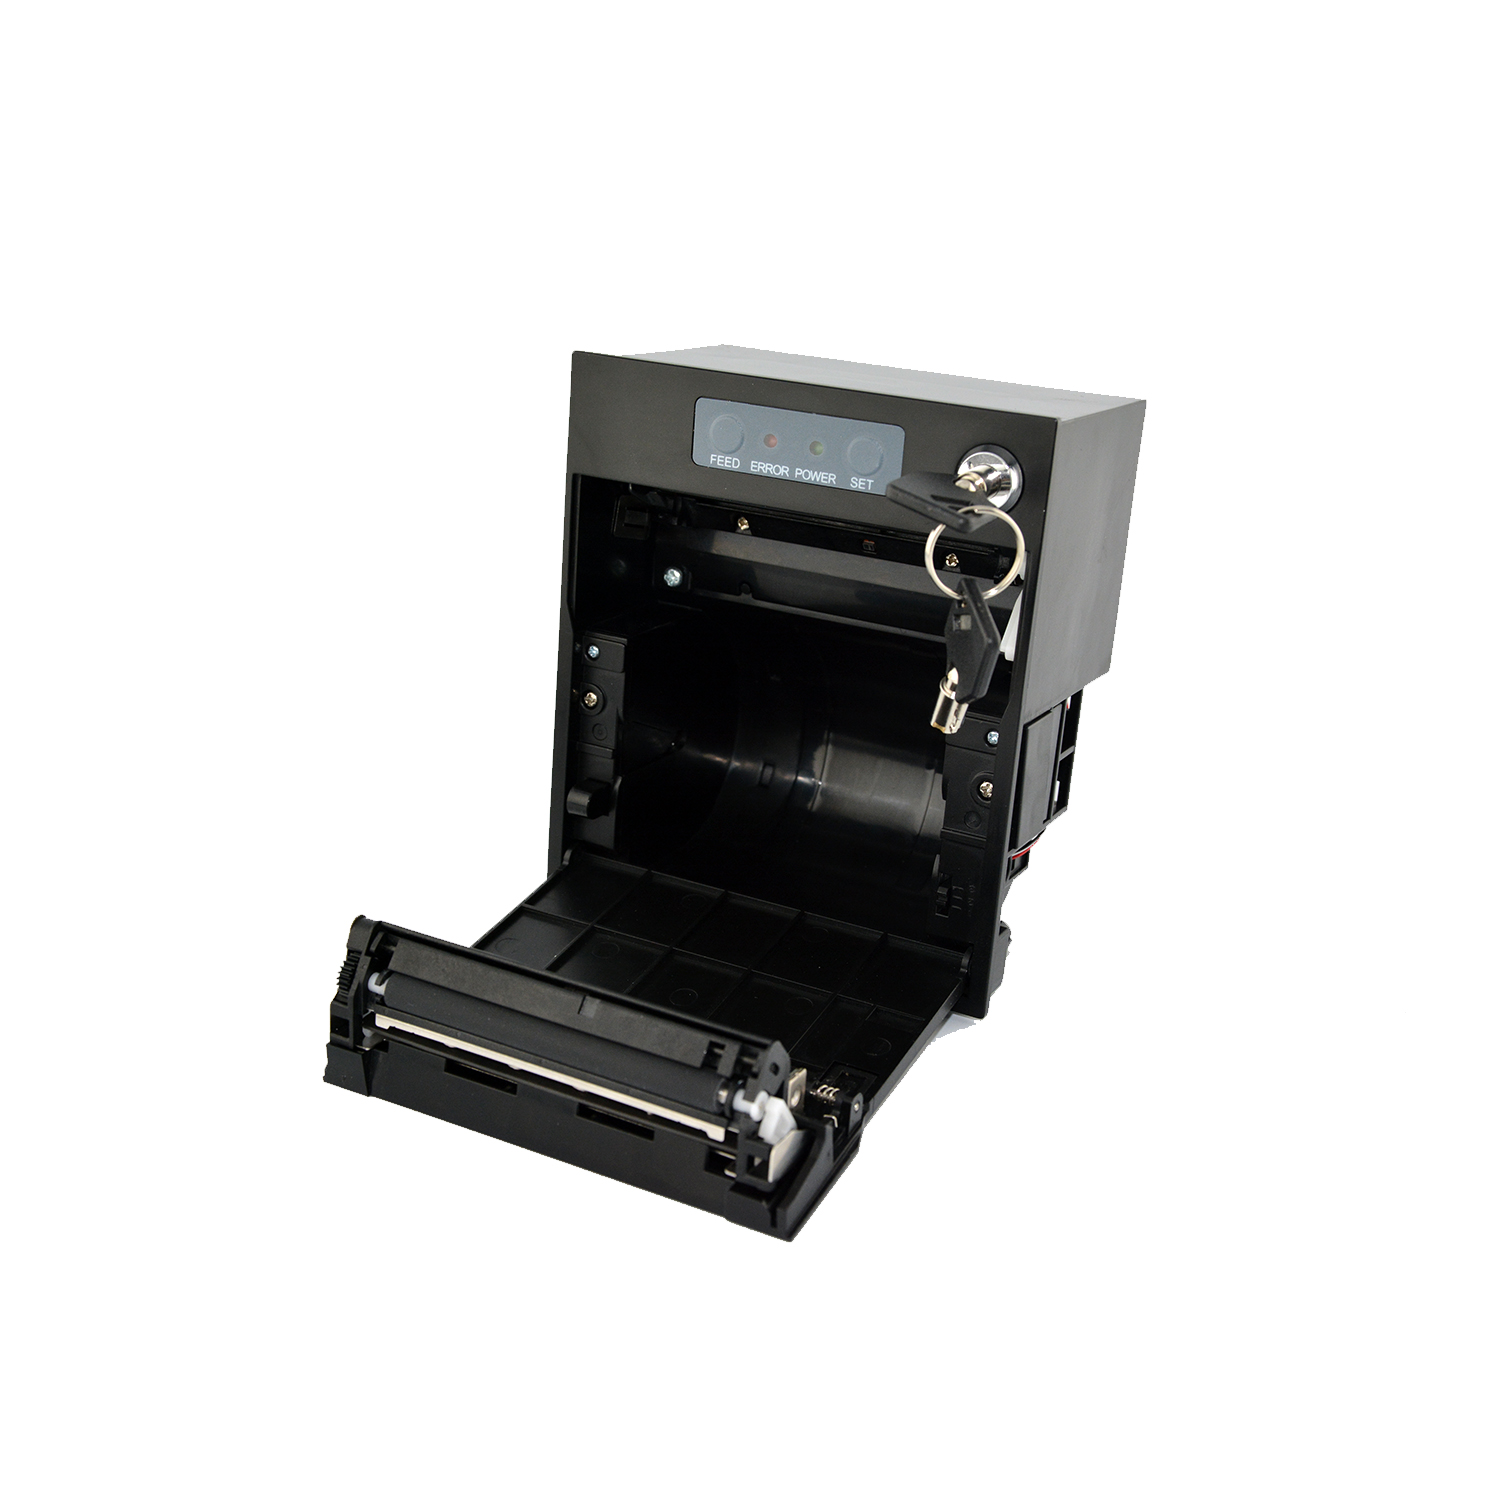 HCC-E5 ESC/POS 80mm Thermal Receipt Panel Printer with Auto Cutter 